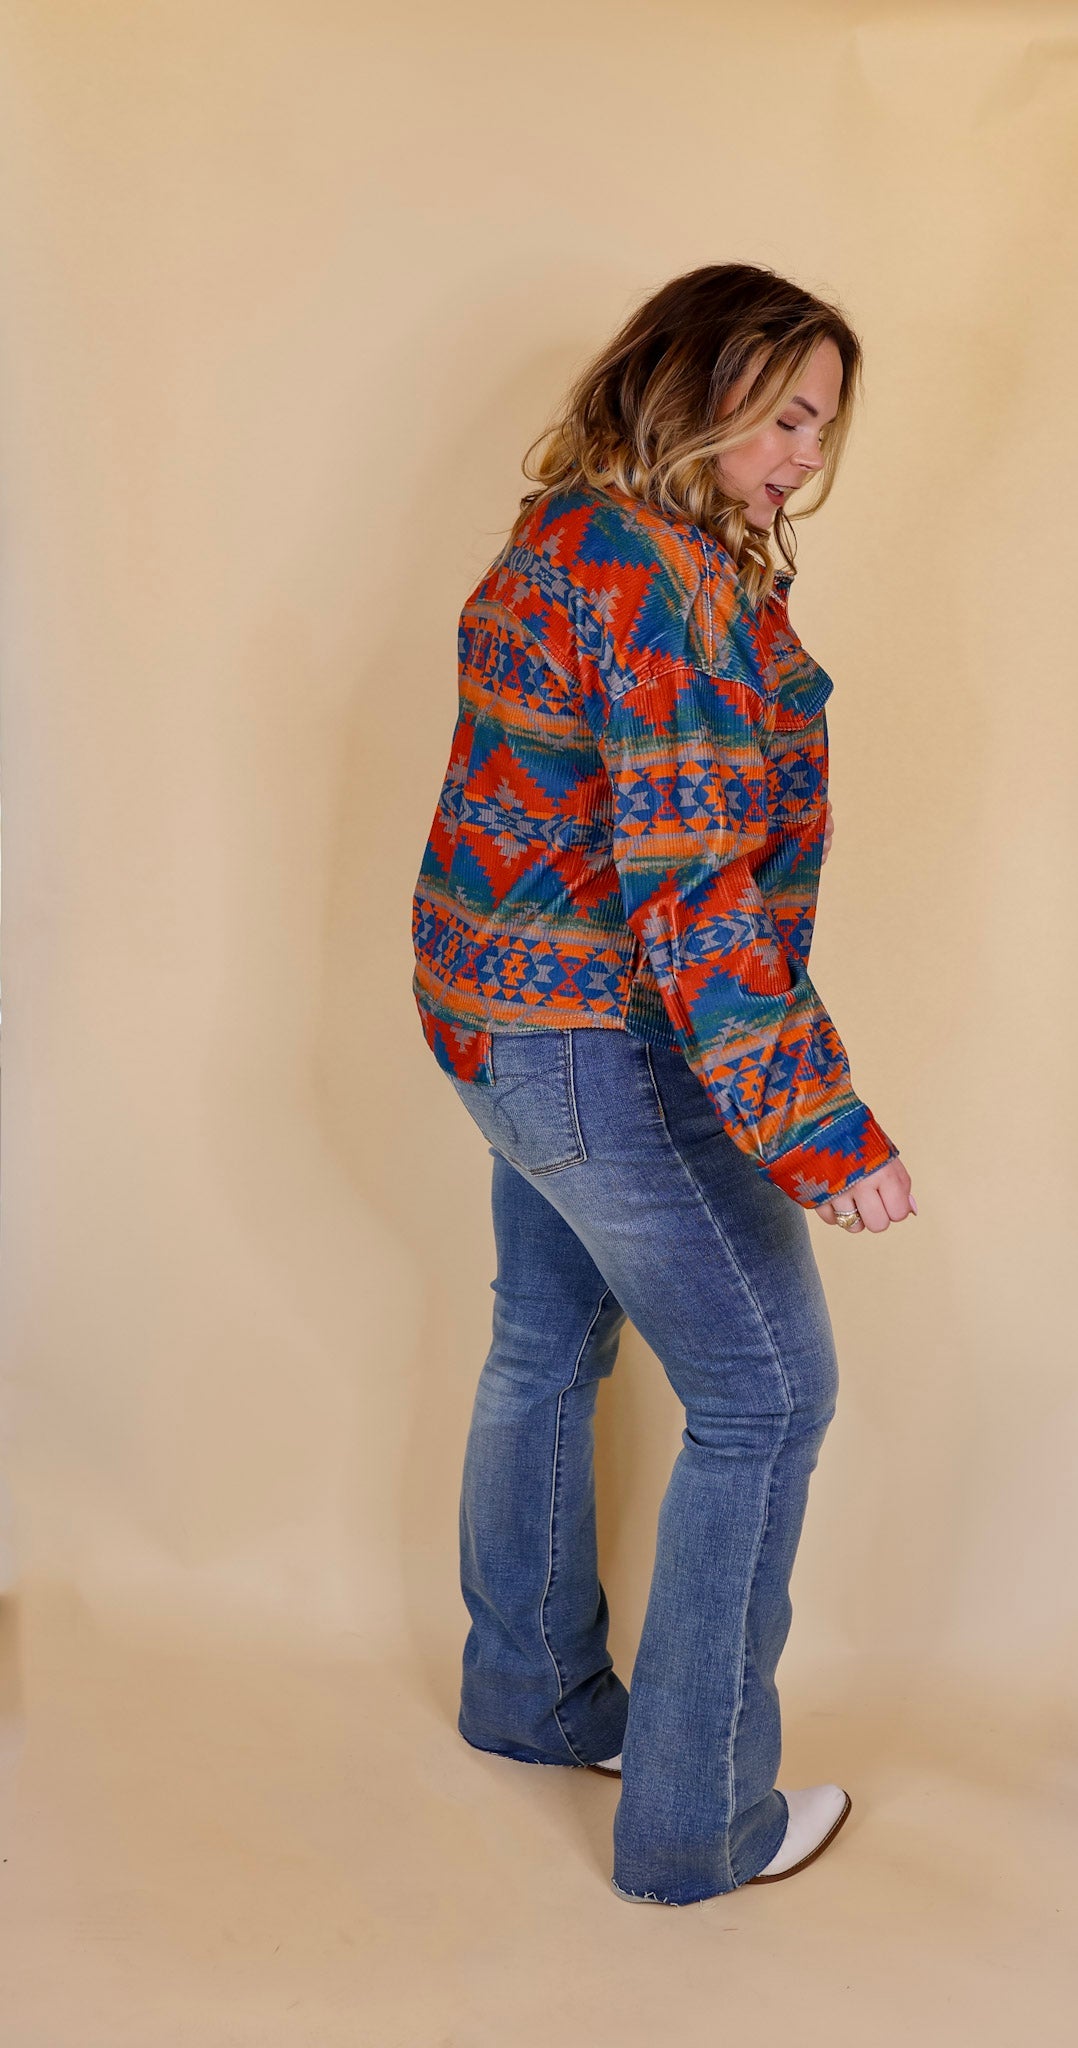 Edgy and Chic Button Up Corduroy Aztec Print Jacket in Red and Blue - Giddy Up Glamour Boutique